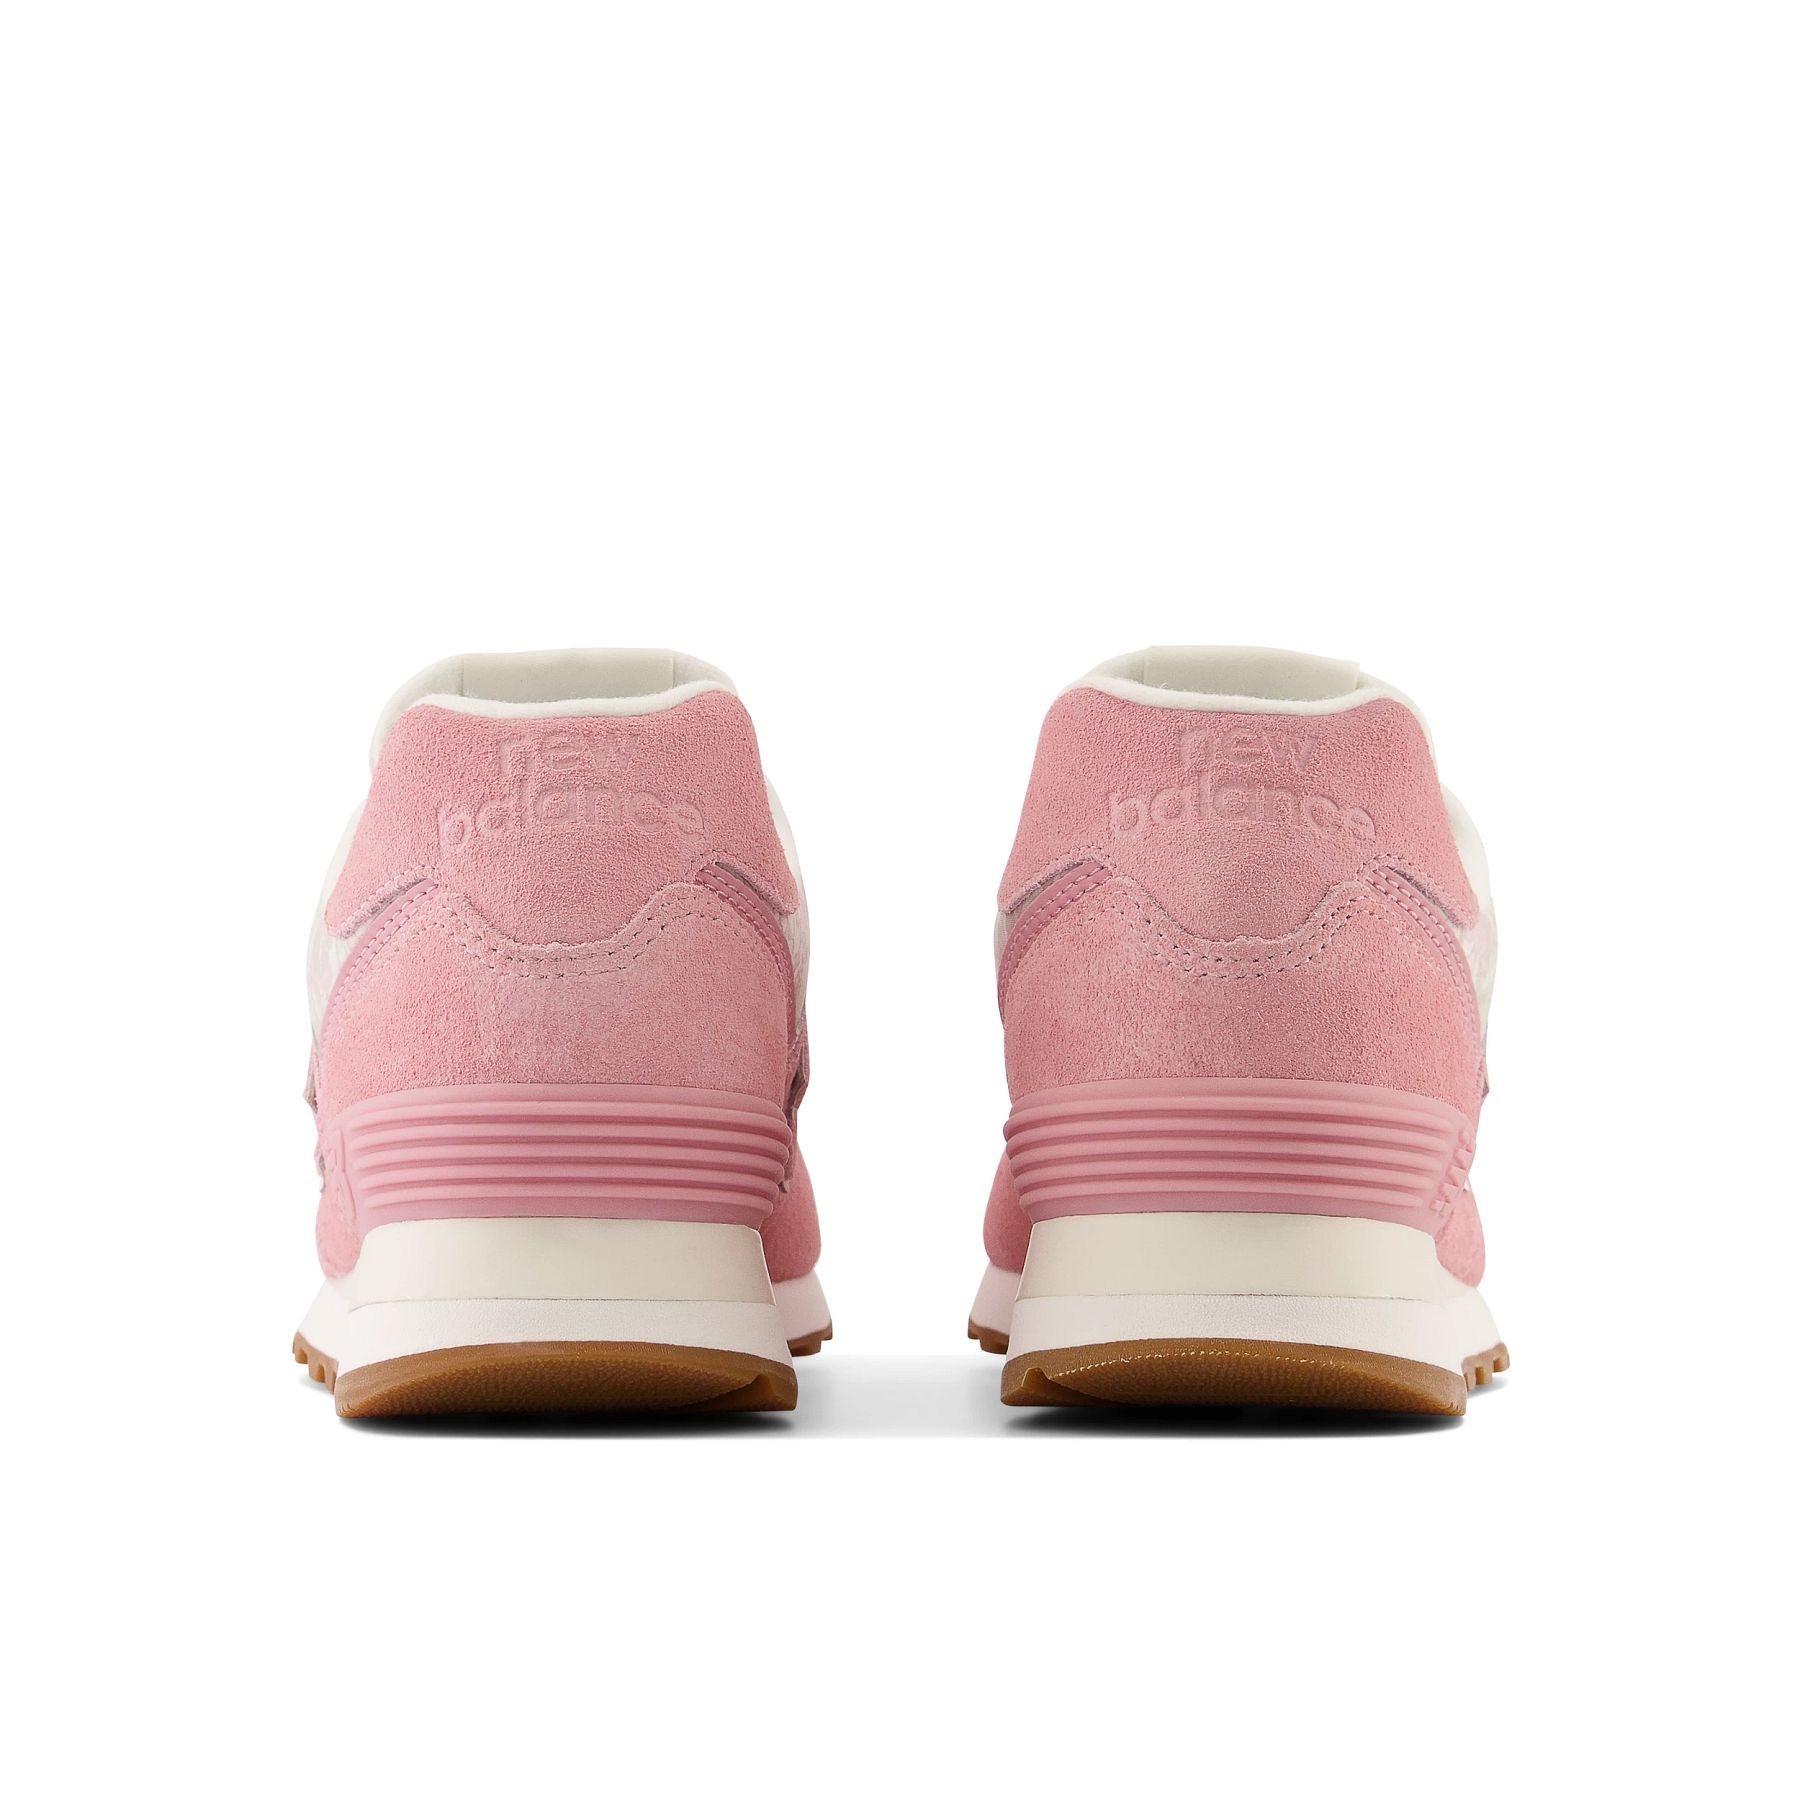 Back view of the Women's New Balance 574 lifestyle in the color Heavenly Rose